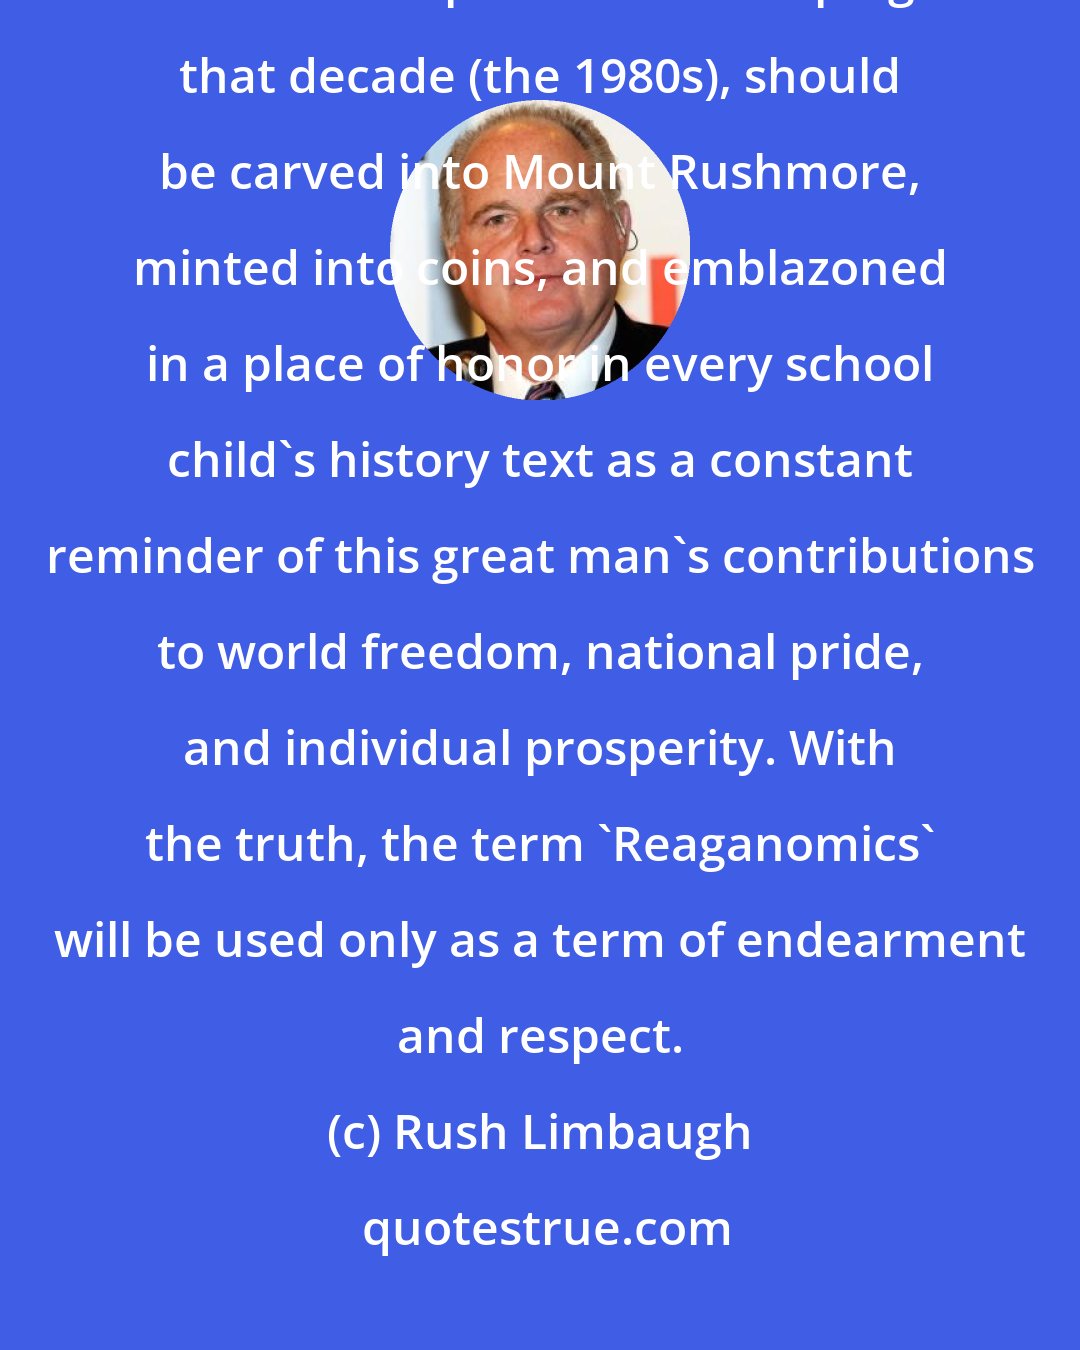 Rush Limbaugh: Regarding Ronald Reagan: In point of fact, the image of Ronald Reagan, the man responsible for shaping that decade (the 1980s), should be carved into Mount Rushmore, minted into coins, and emblazoned in a place of honor in every school child's history text as a constant reminder of this great man's contributions to world freedom, national pride, and individual prosperity. With the truth, the term 'Reaganomics' will be used only as a term of endearment and respect.